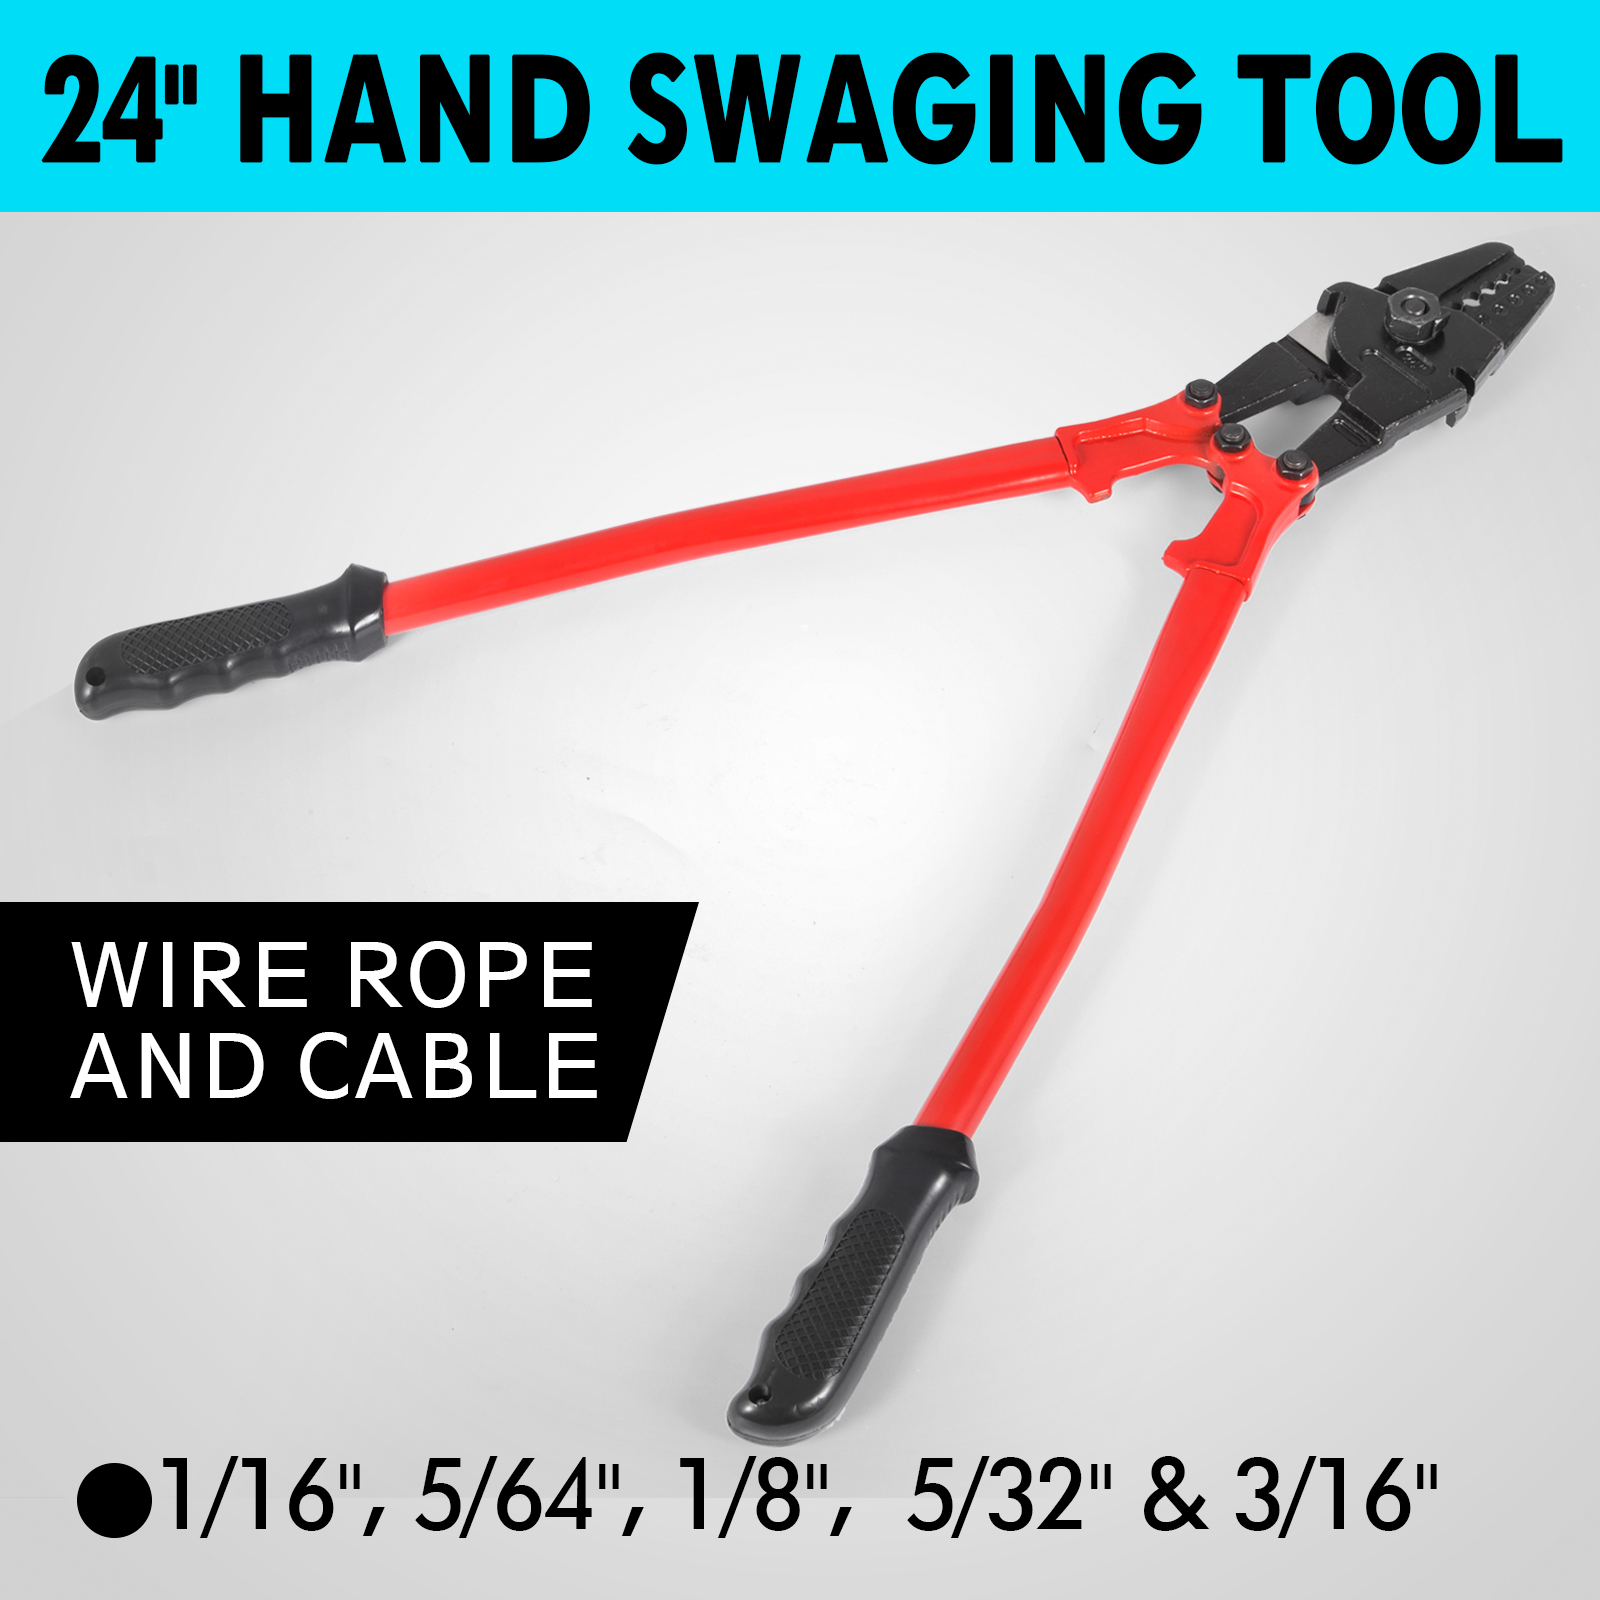 5/32" 1/4" 5/16" Hand Swager Crimper for Wire Rope and Cable 30" Swaging Tool 